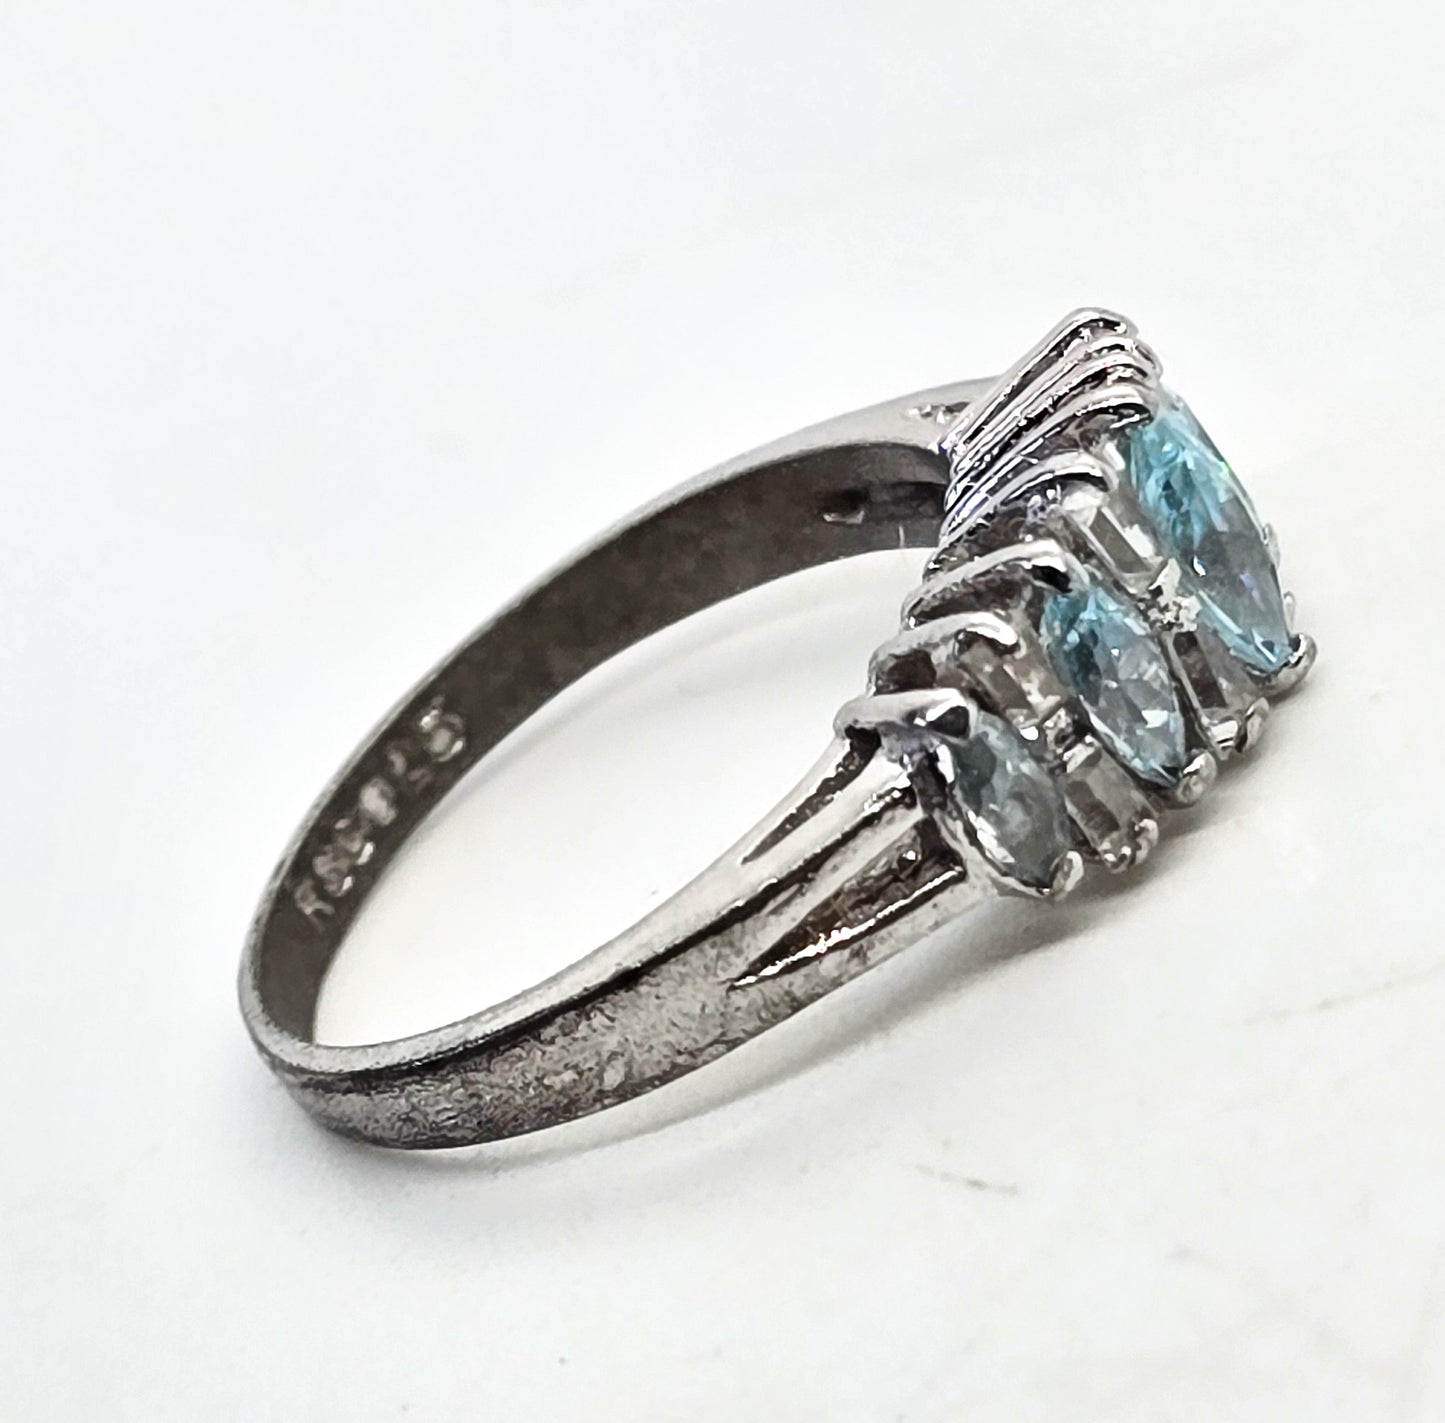 RSC Blue aqua synthetic glass marquis cut sterling silver vintage ring size 6